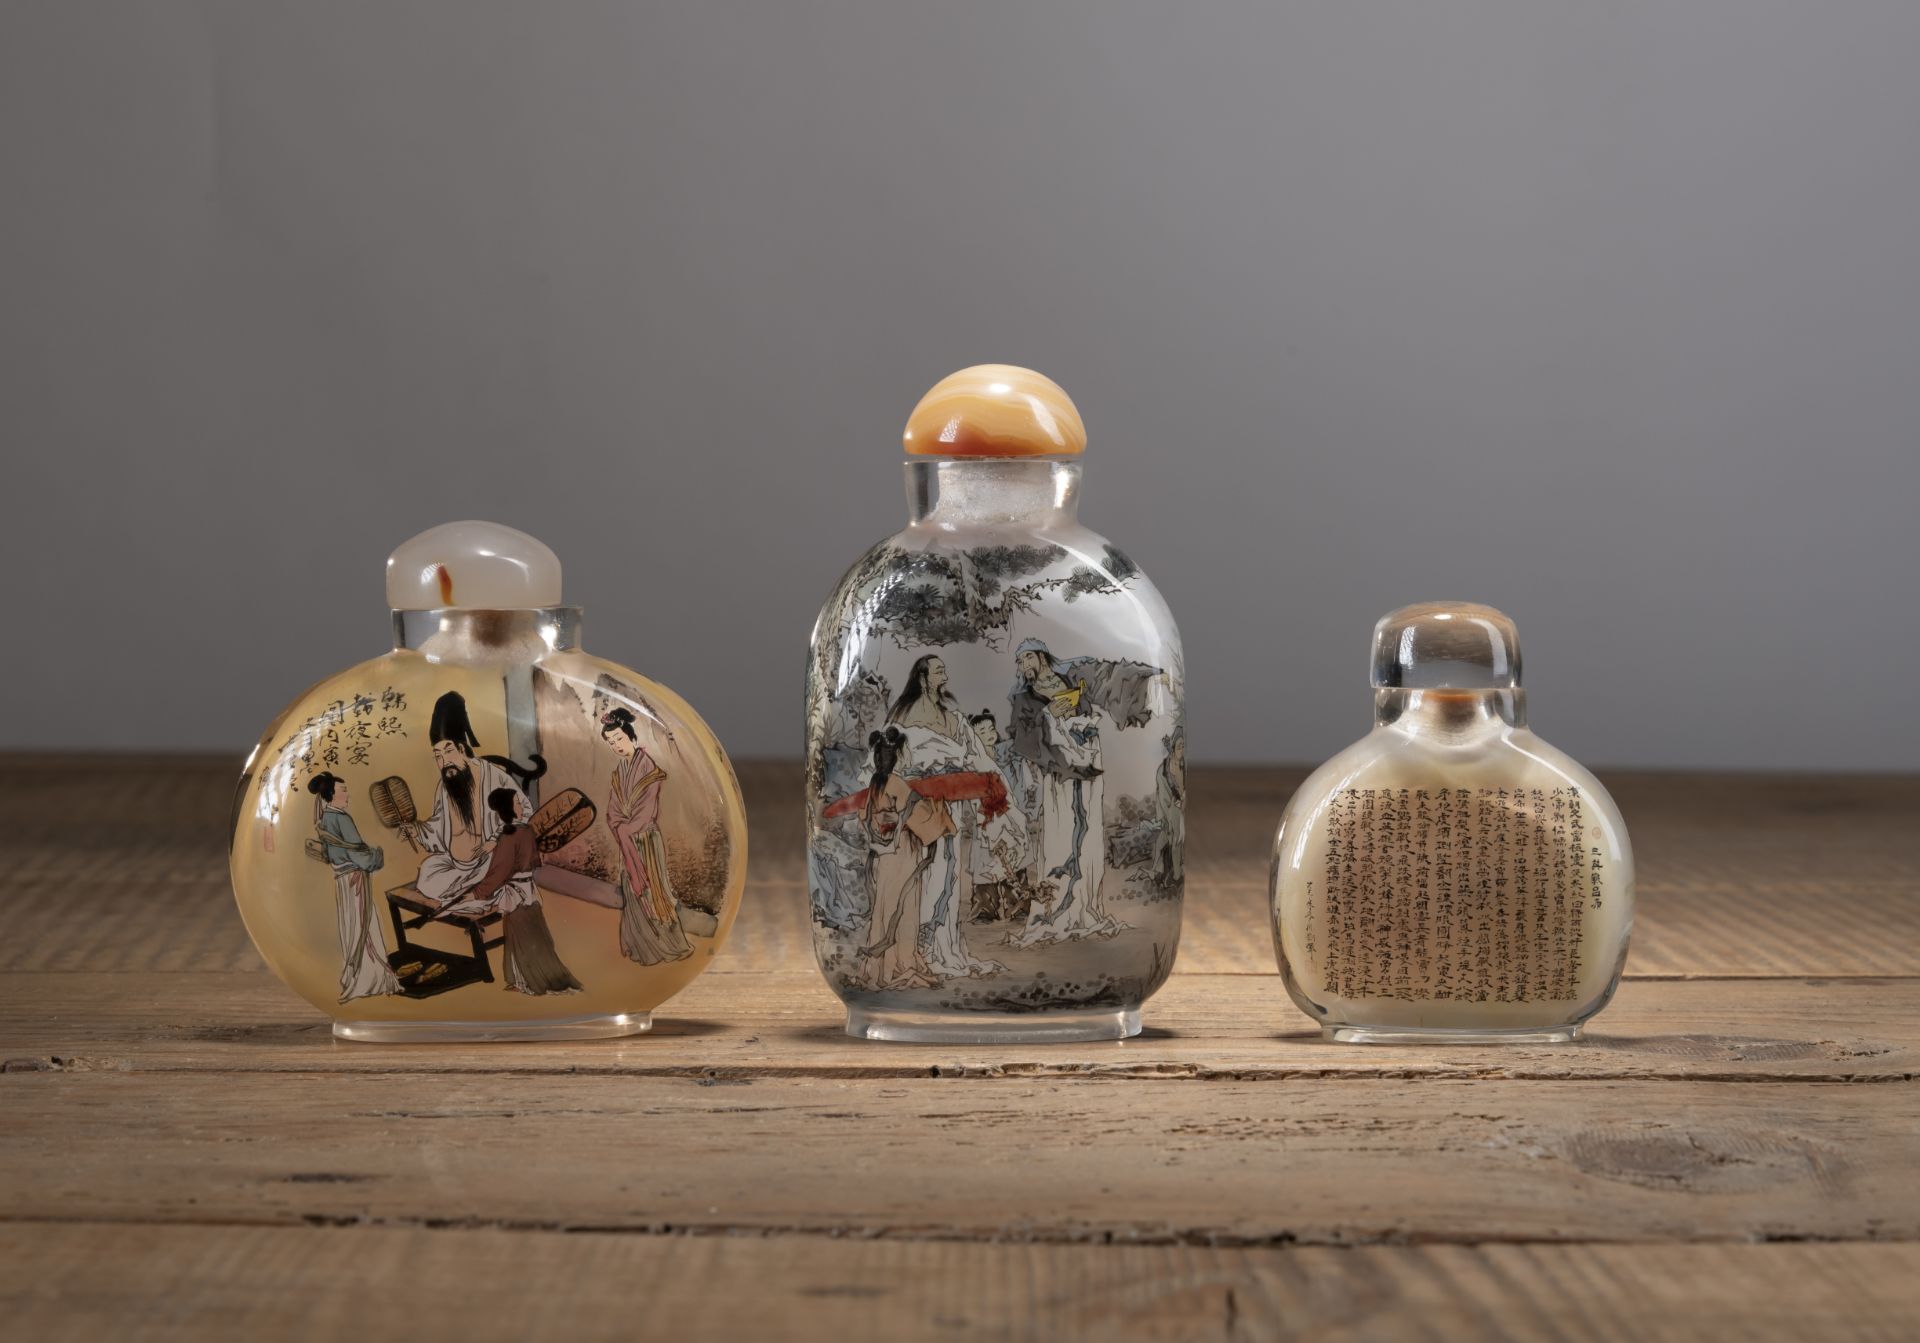 THREE GLASS SNUFF BOTTLES WITH FINE INSIDE PAINTING OF 'THE SEVEN SAGES OF THE BAMBOO GROVE', 'THE - Image 4 of 5